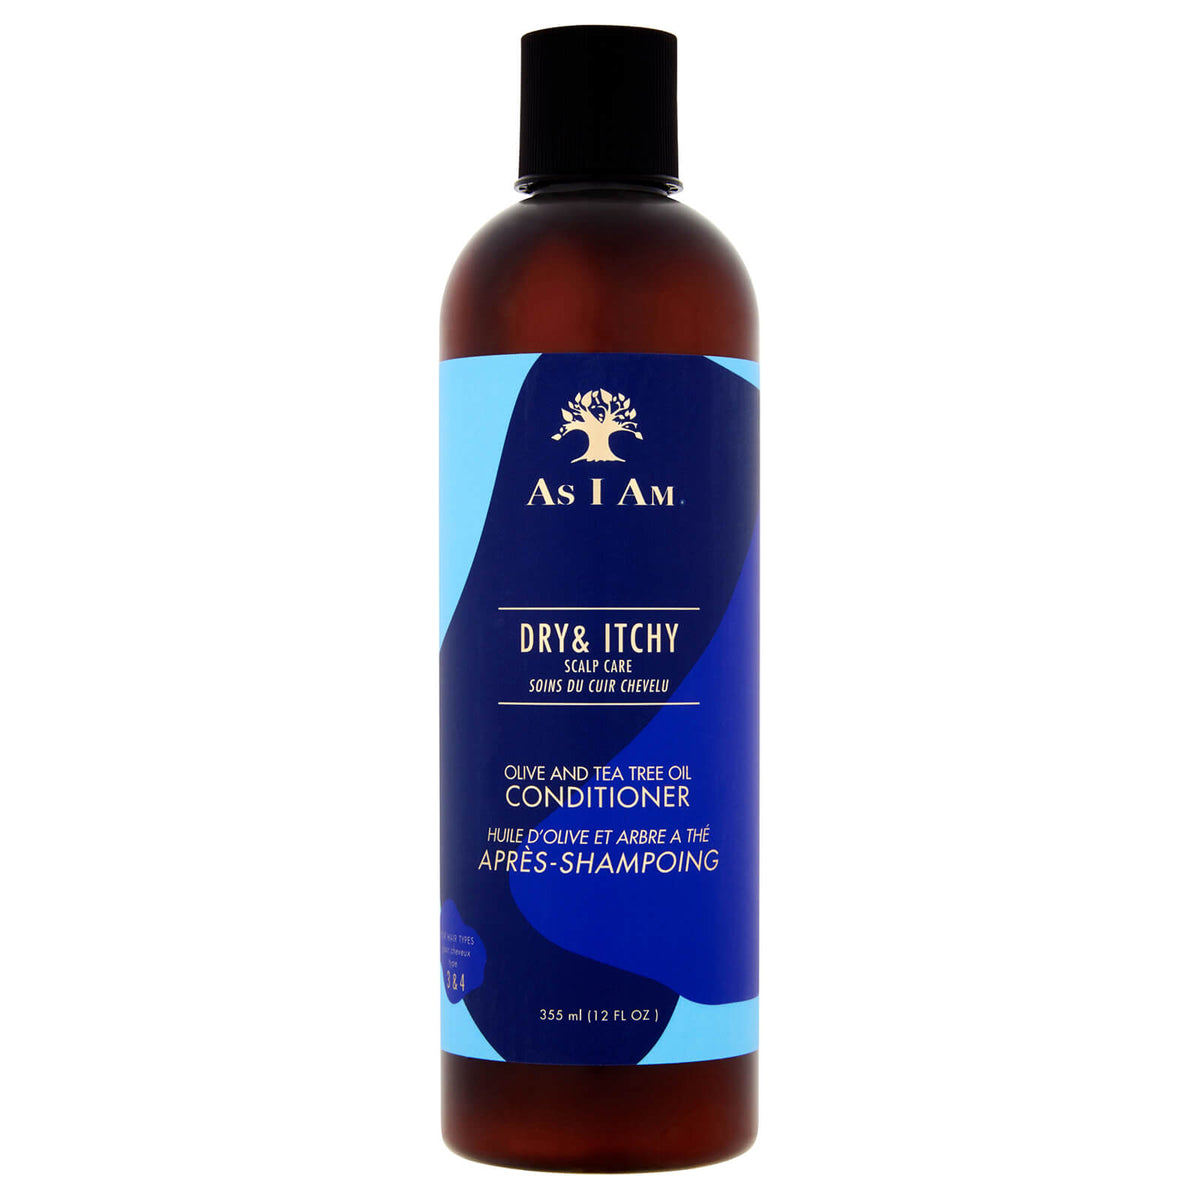 DRY & ITCHY OLIVE & TEA TREE OIL CONDITIONER, 355 ML